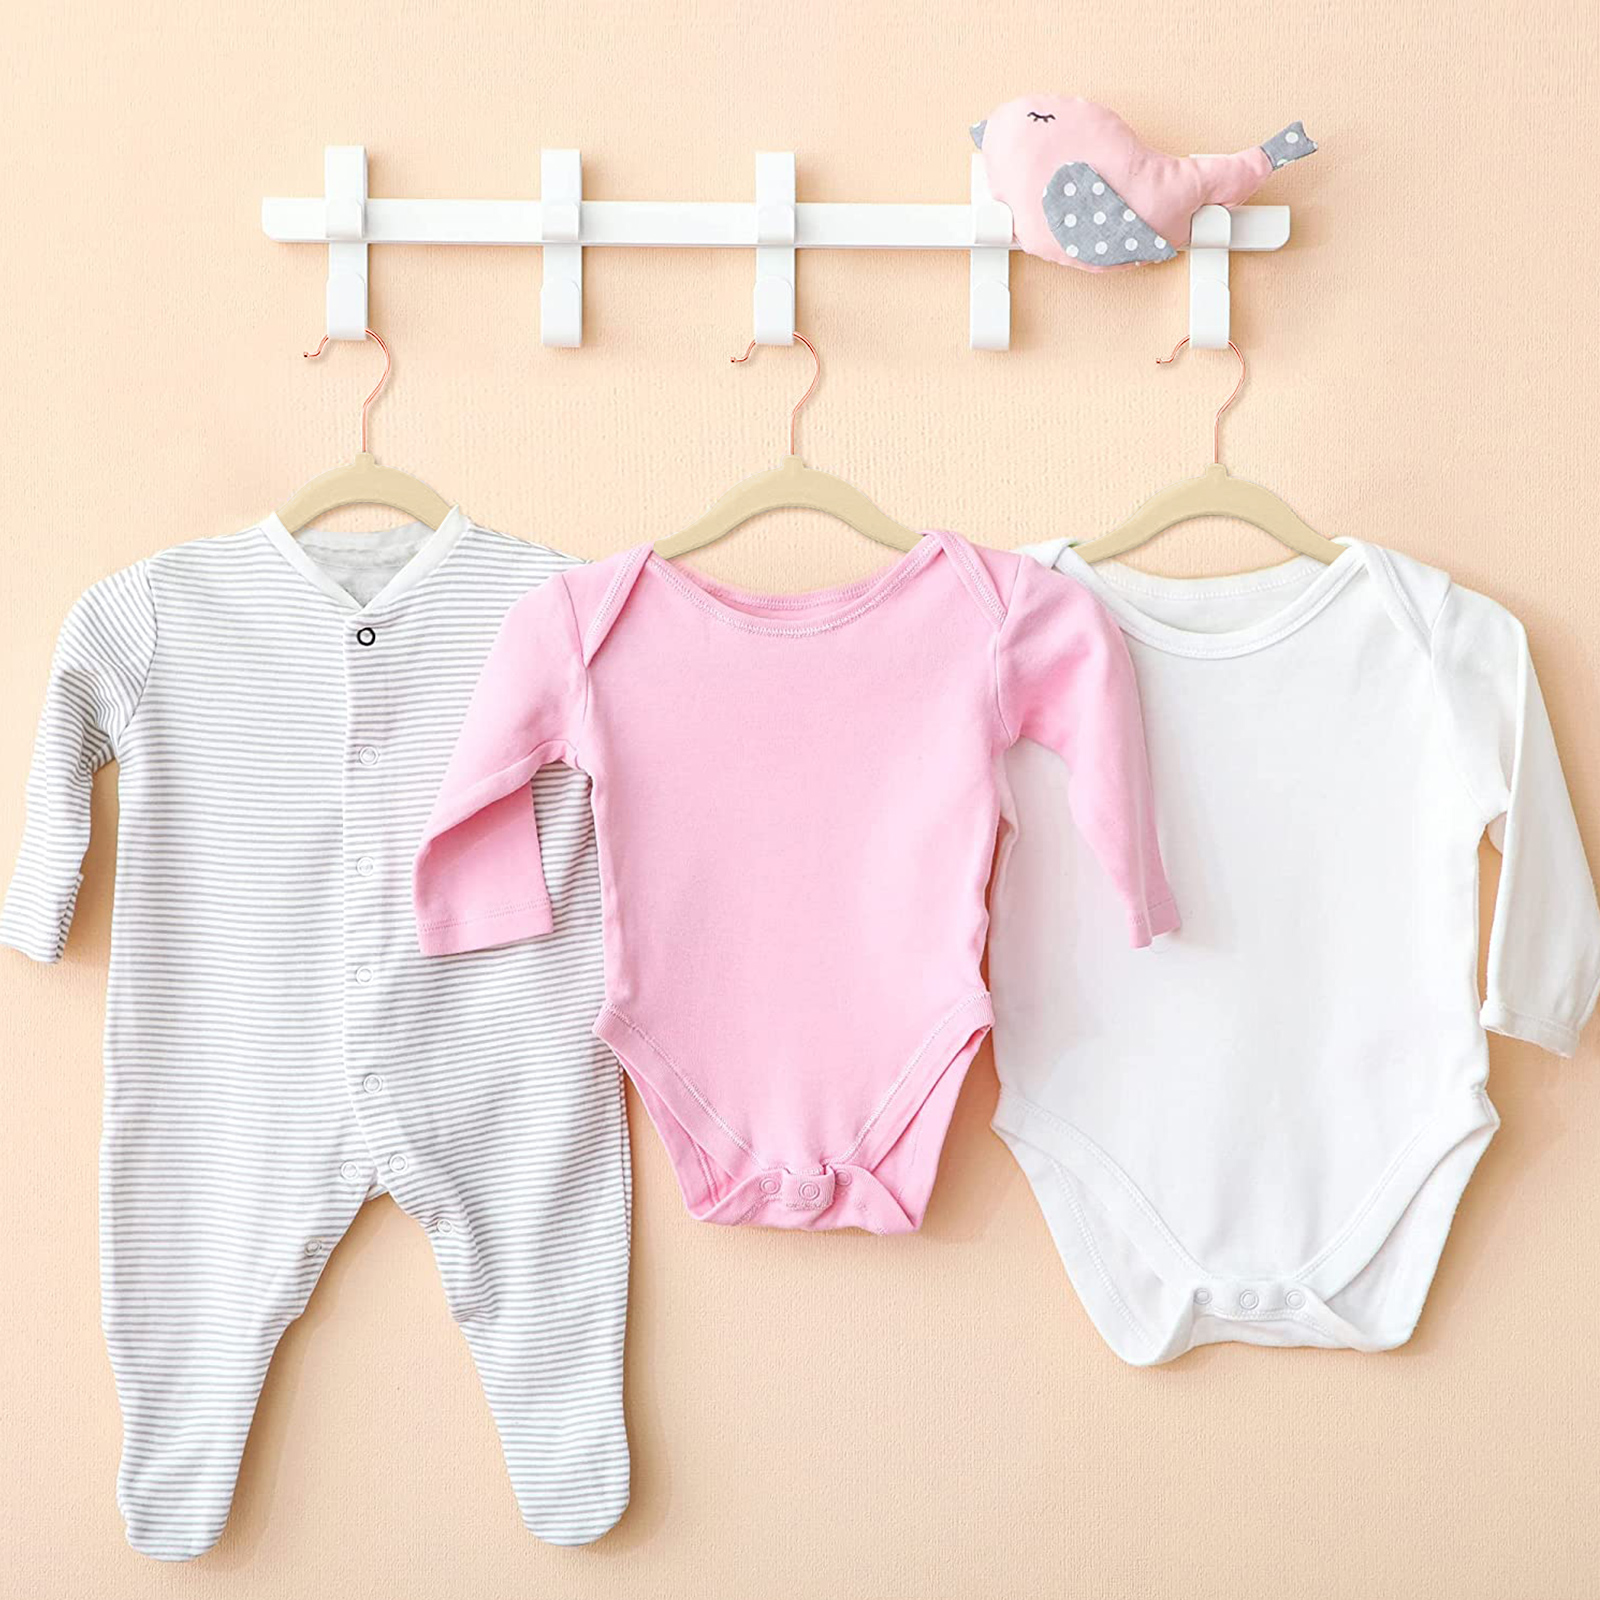 10-pack Baby Hangers Plastic Kids Non-Slip Clothes Hangers for Laundry and  Closet Only $7.99 PatPat US Mobile